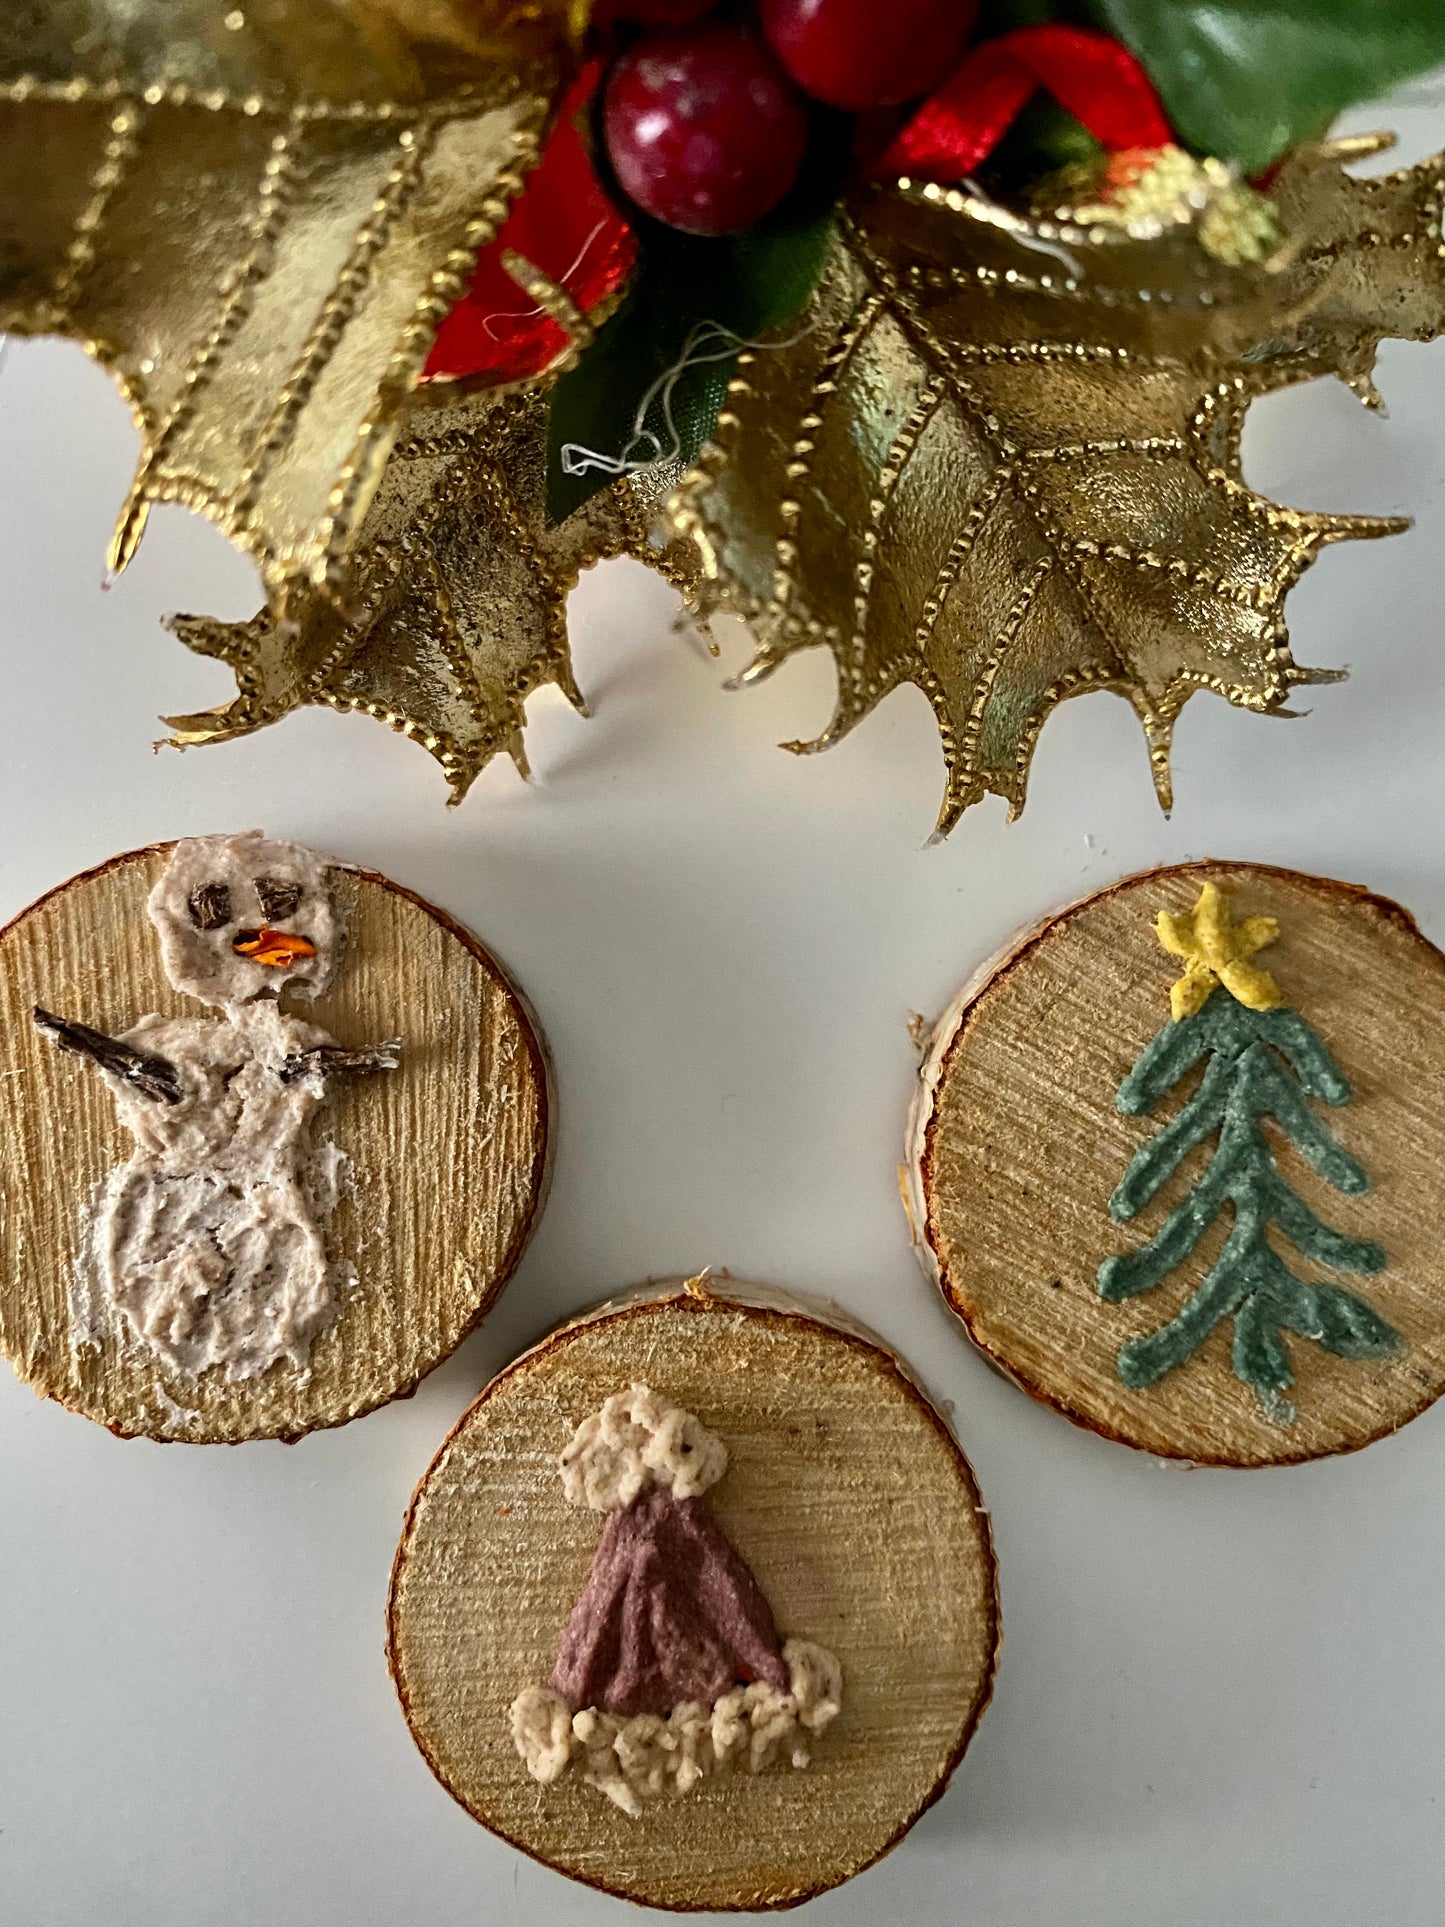 
Delicious Assorted Festive Organic Wood Slices